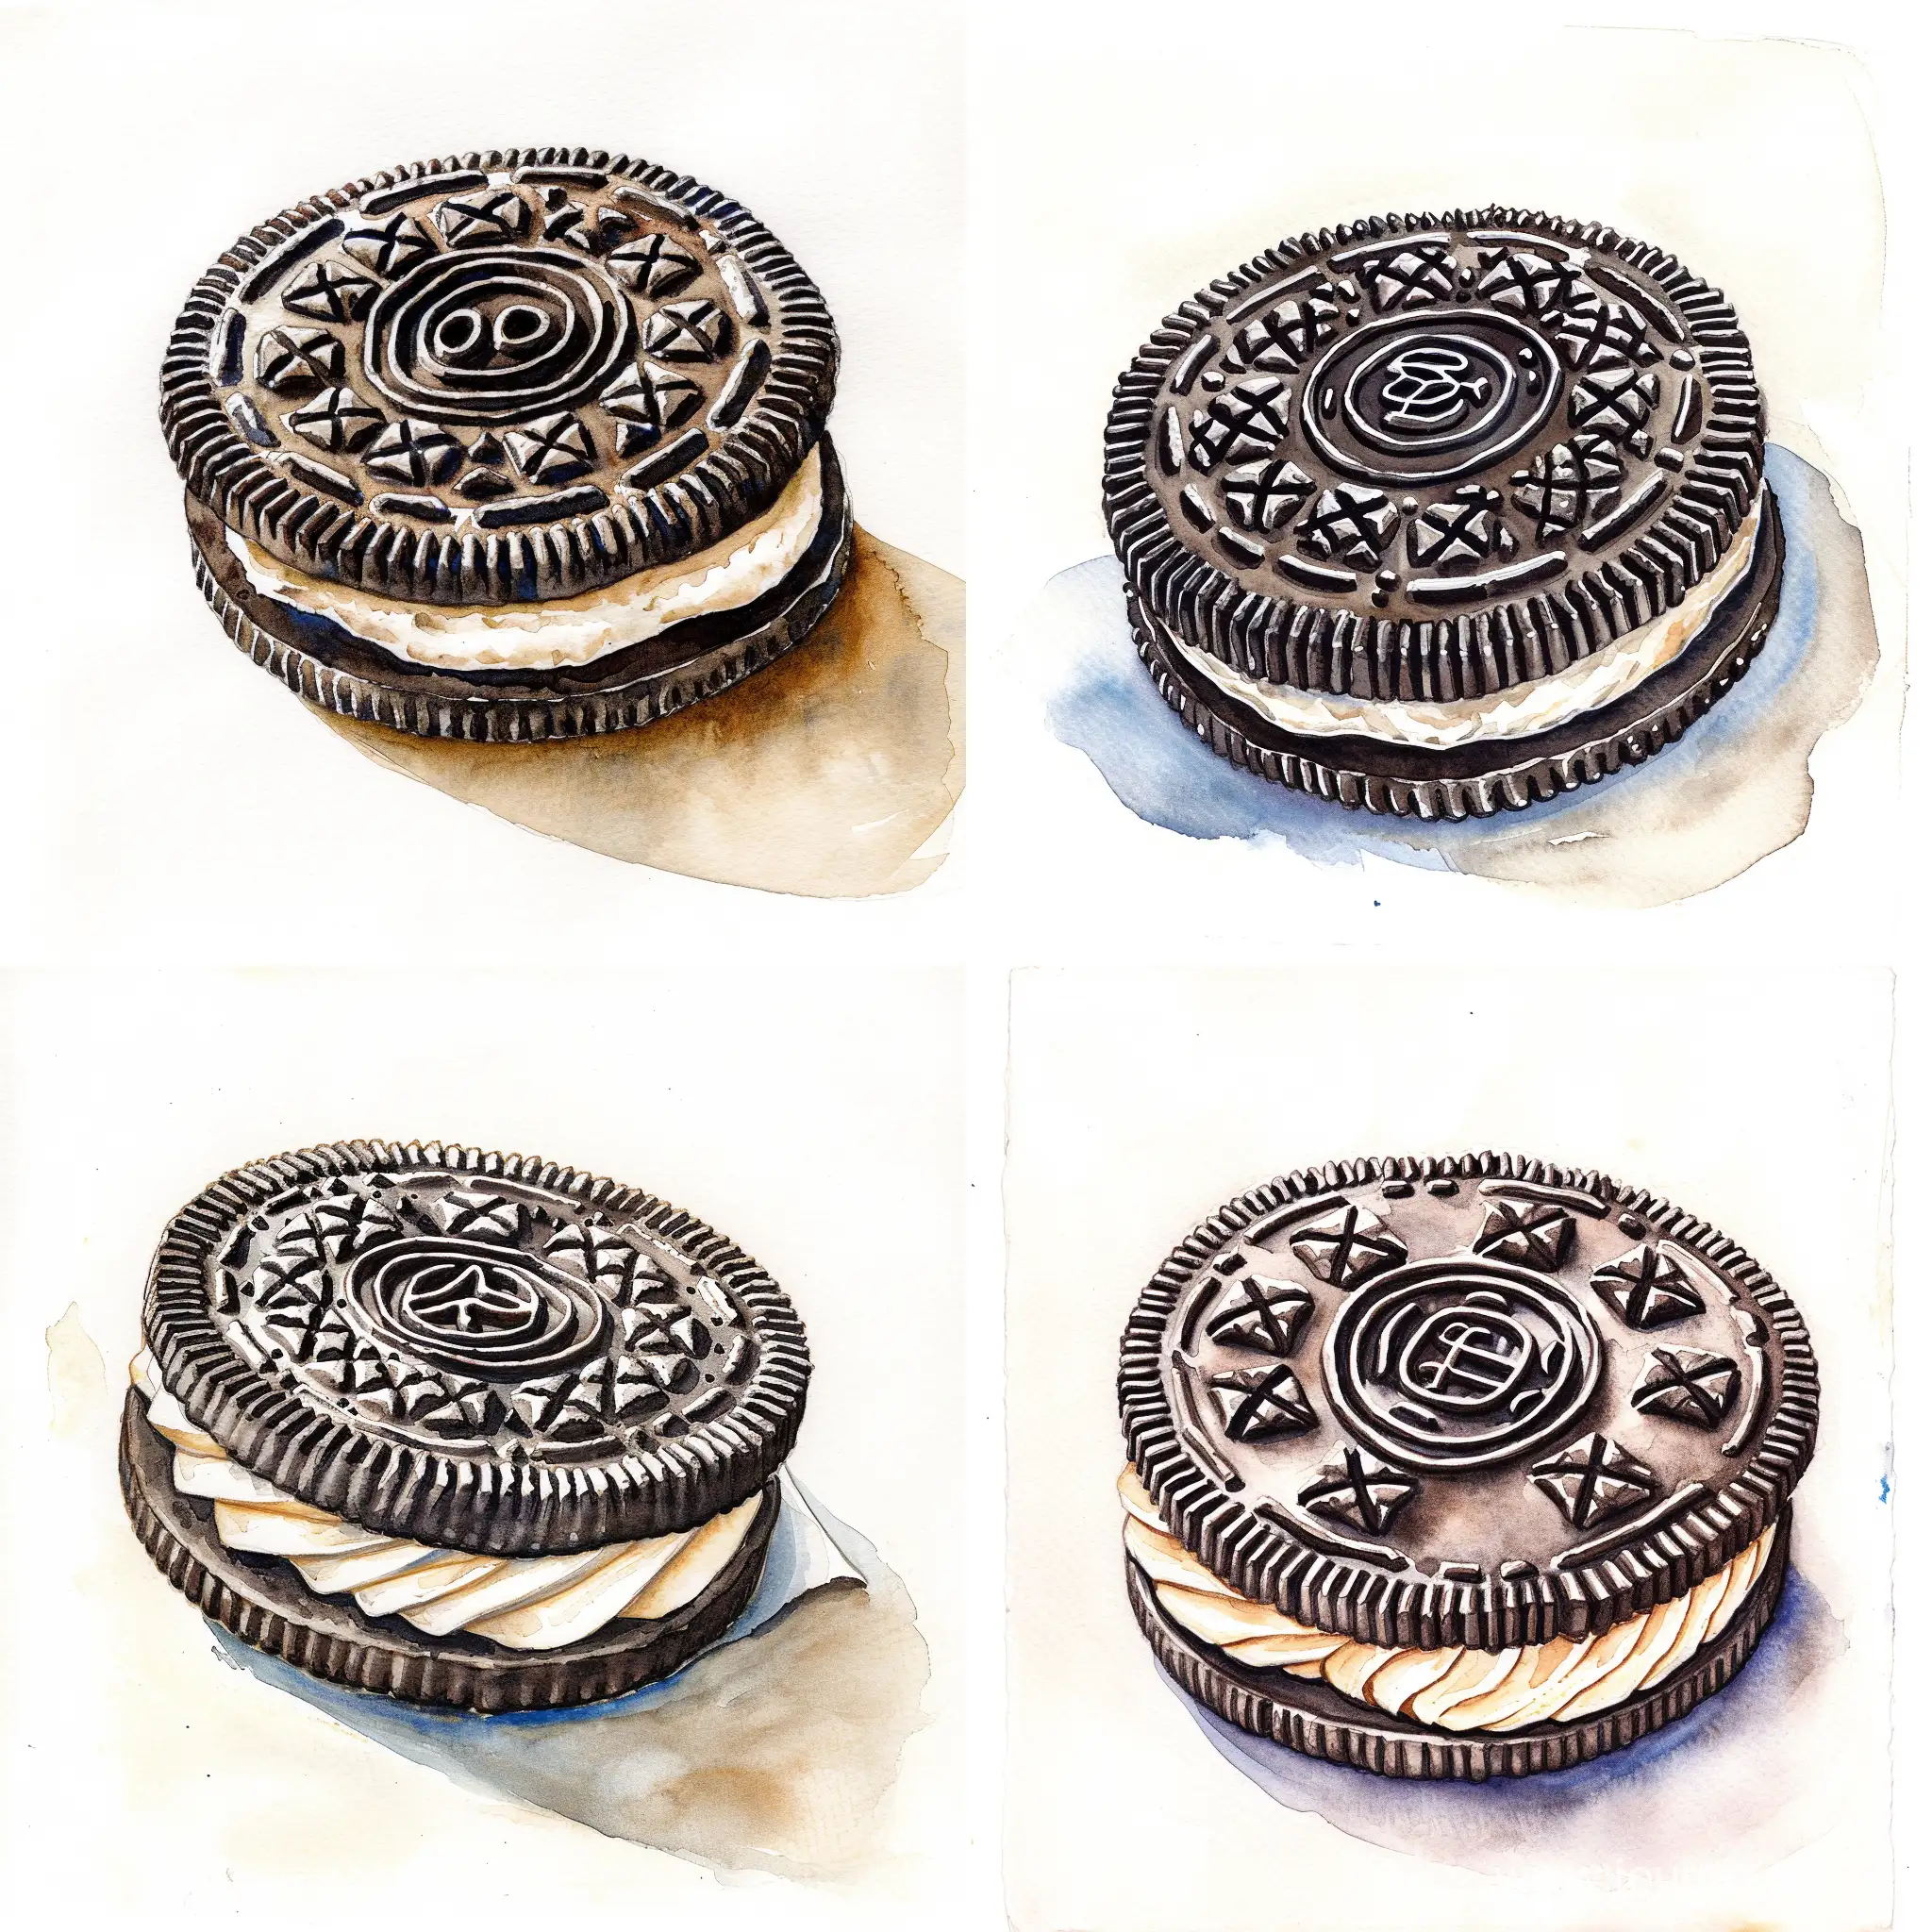 An Oreo cookie, watercolor